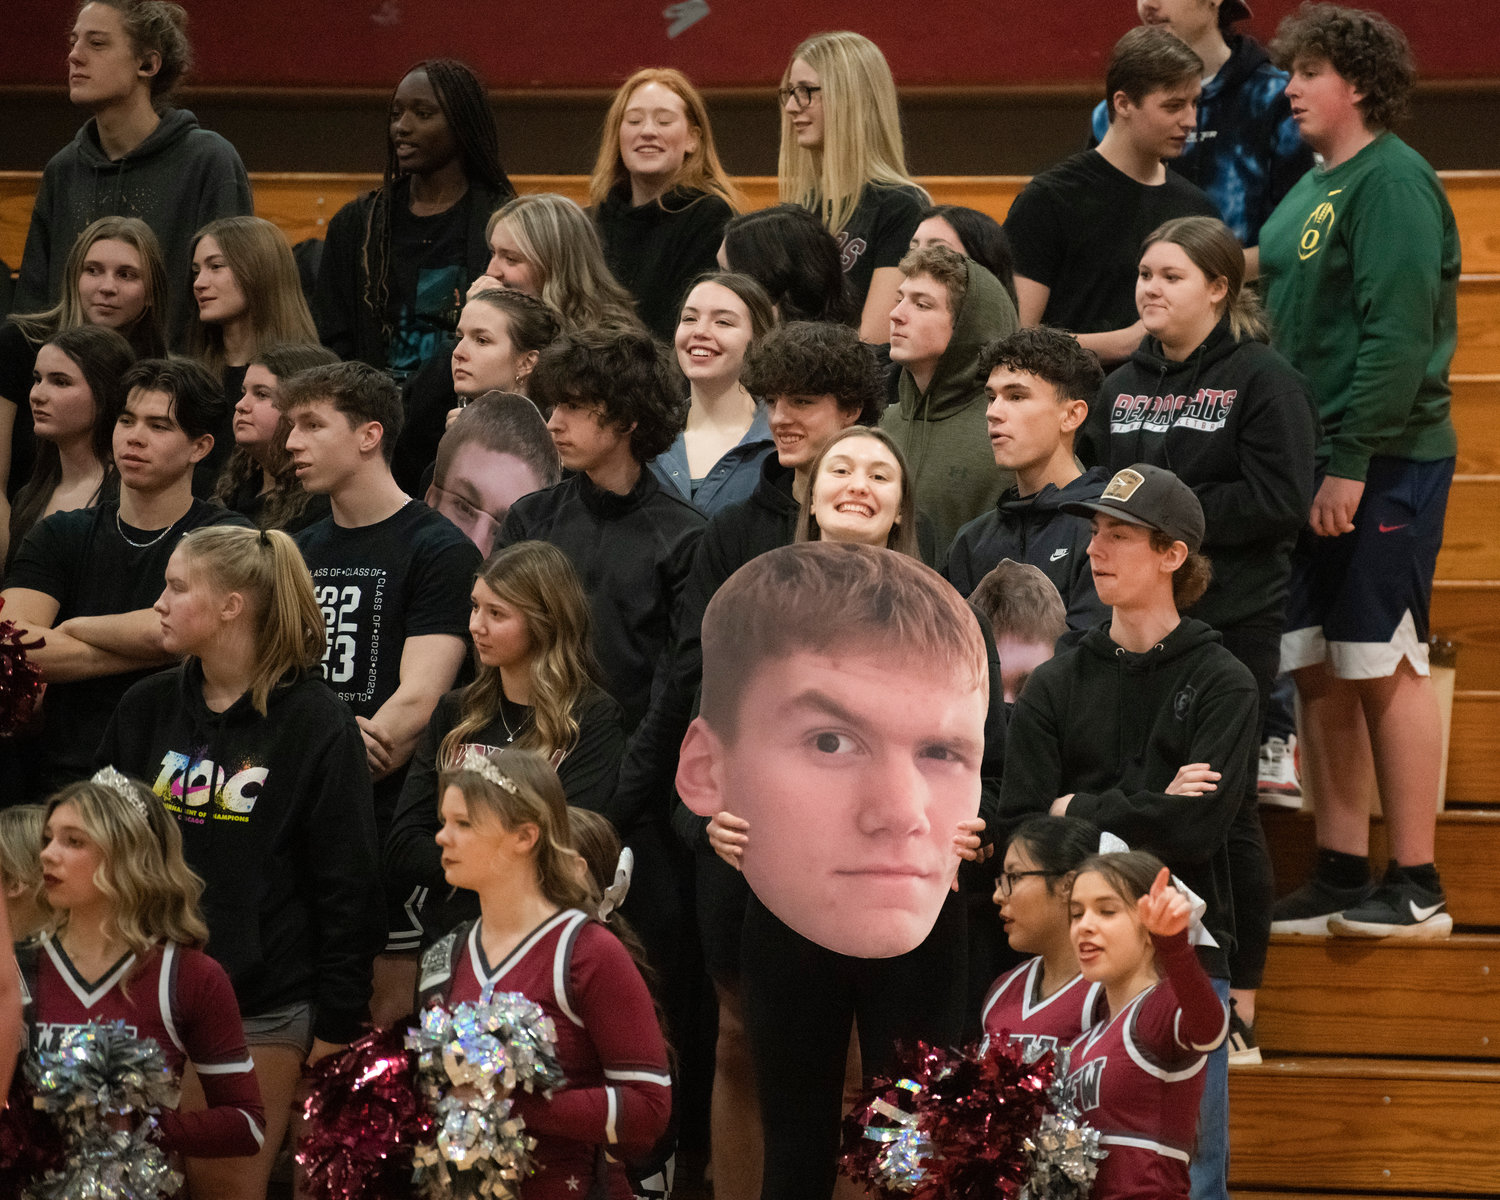 Julia Dalan holds up a cut out of her brother Soren during a Tuesday night game in Chehalis.